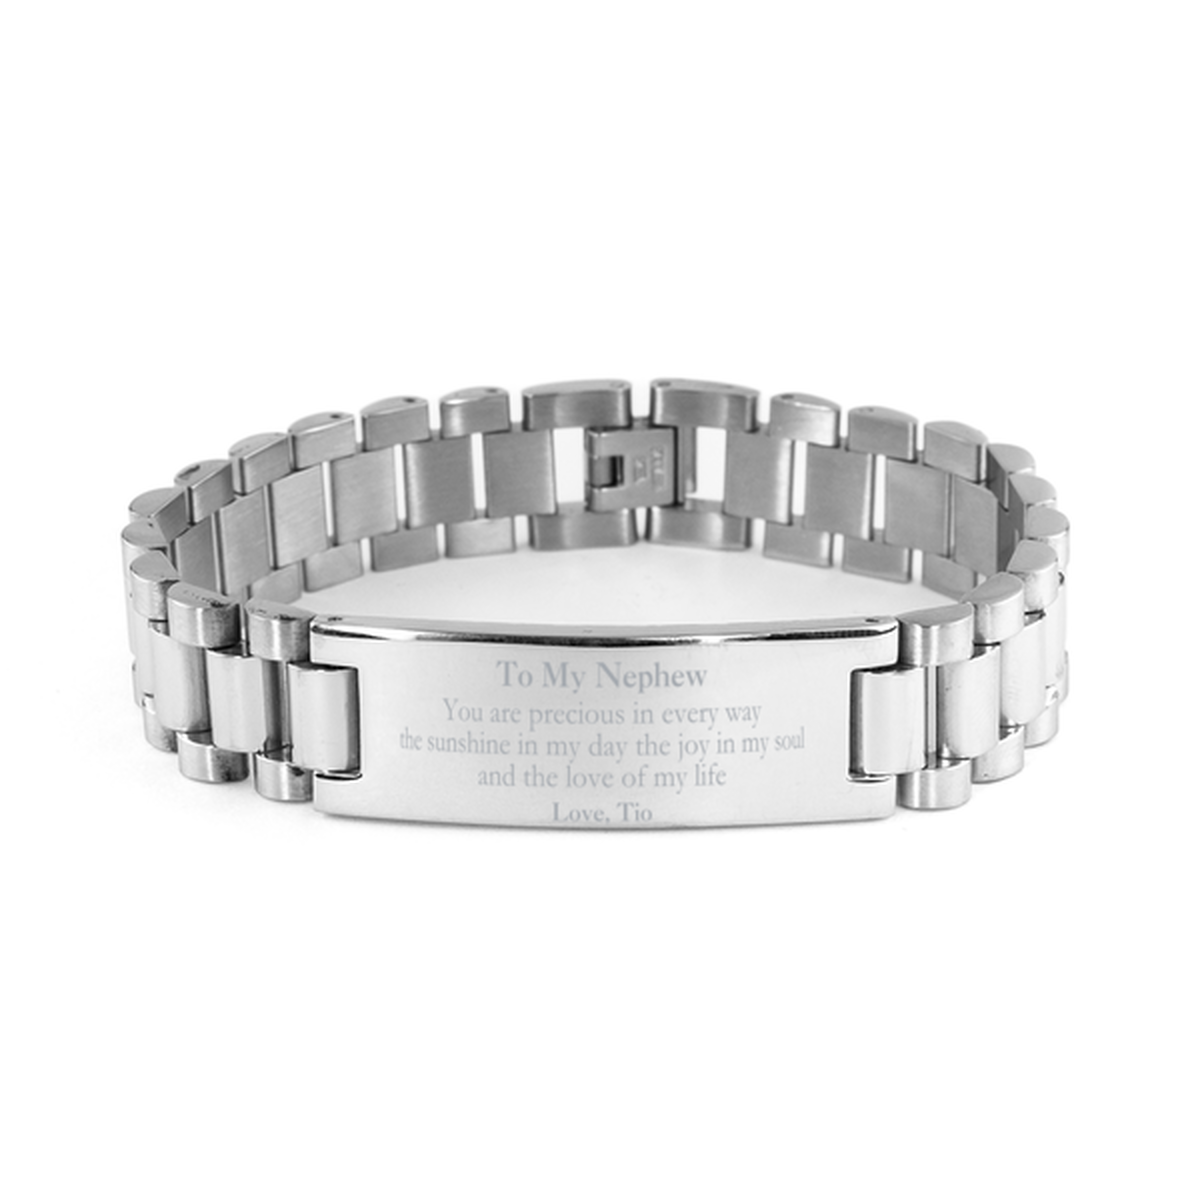 Graduation Gifts for Nephew Ladder Stainless Steel Bracelet Present from Tio, Christmas Nephew Birthday Gifts Nephew You are precious in every way the sunshine in my day. Love, Tio